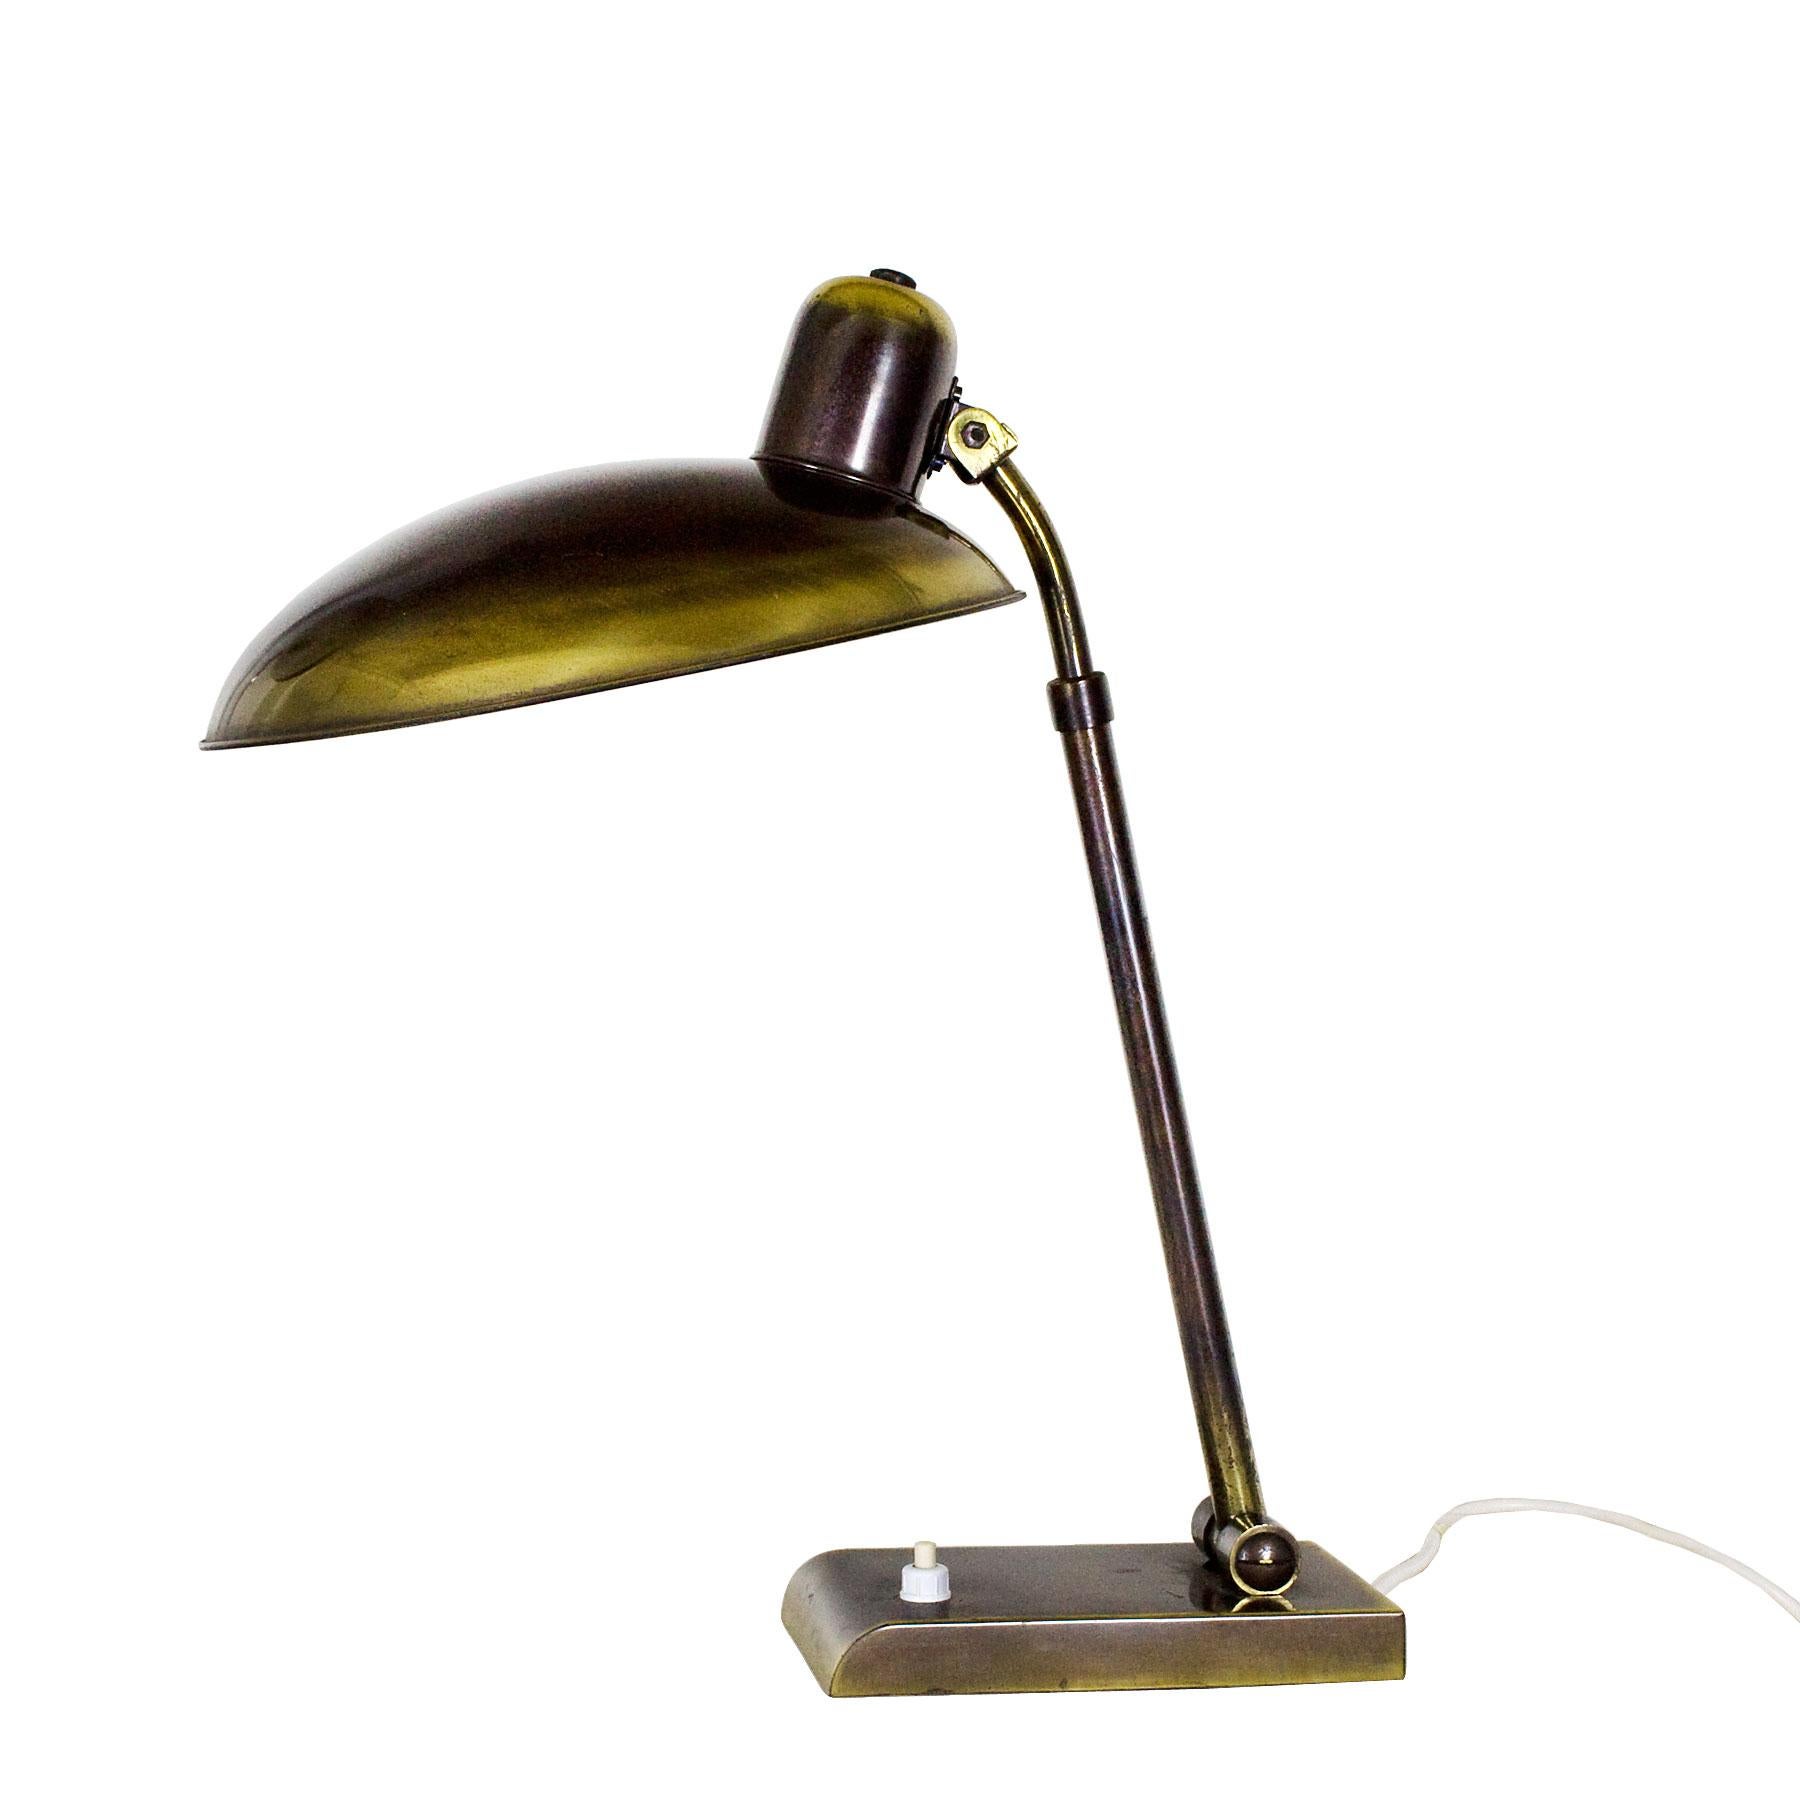 Pair of desk lamps, patinated brass, two inclinations systems and height adjustment.

Italy, circa 1950
Measurements:
Width max 56 min 30 cm
Depth 22 cm
Height max 51 min 35 cm.